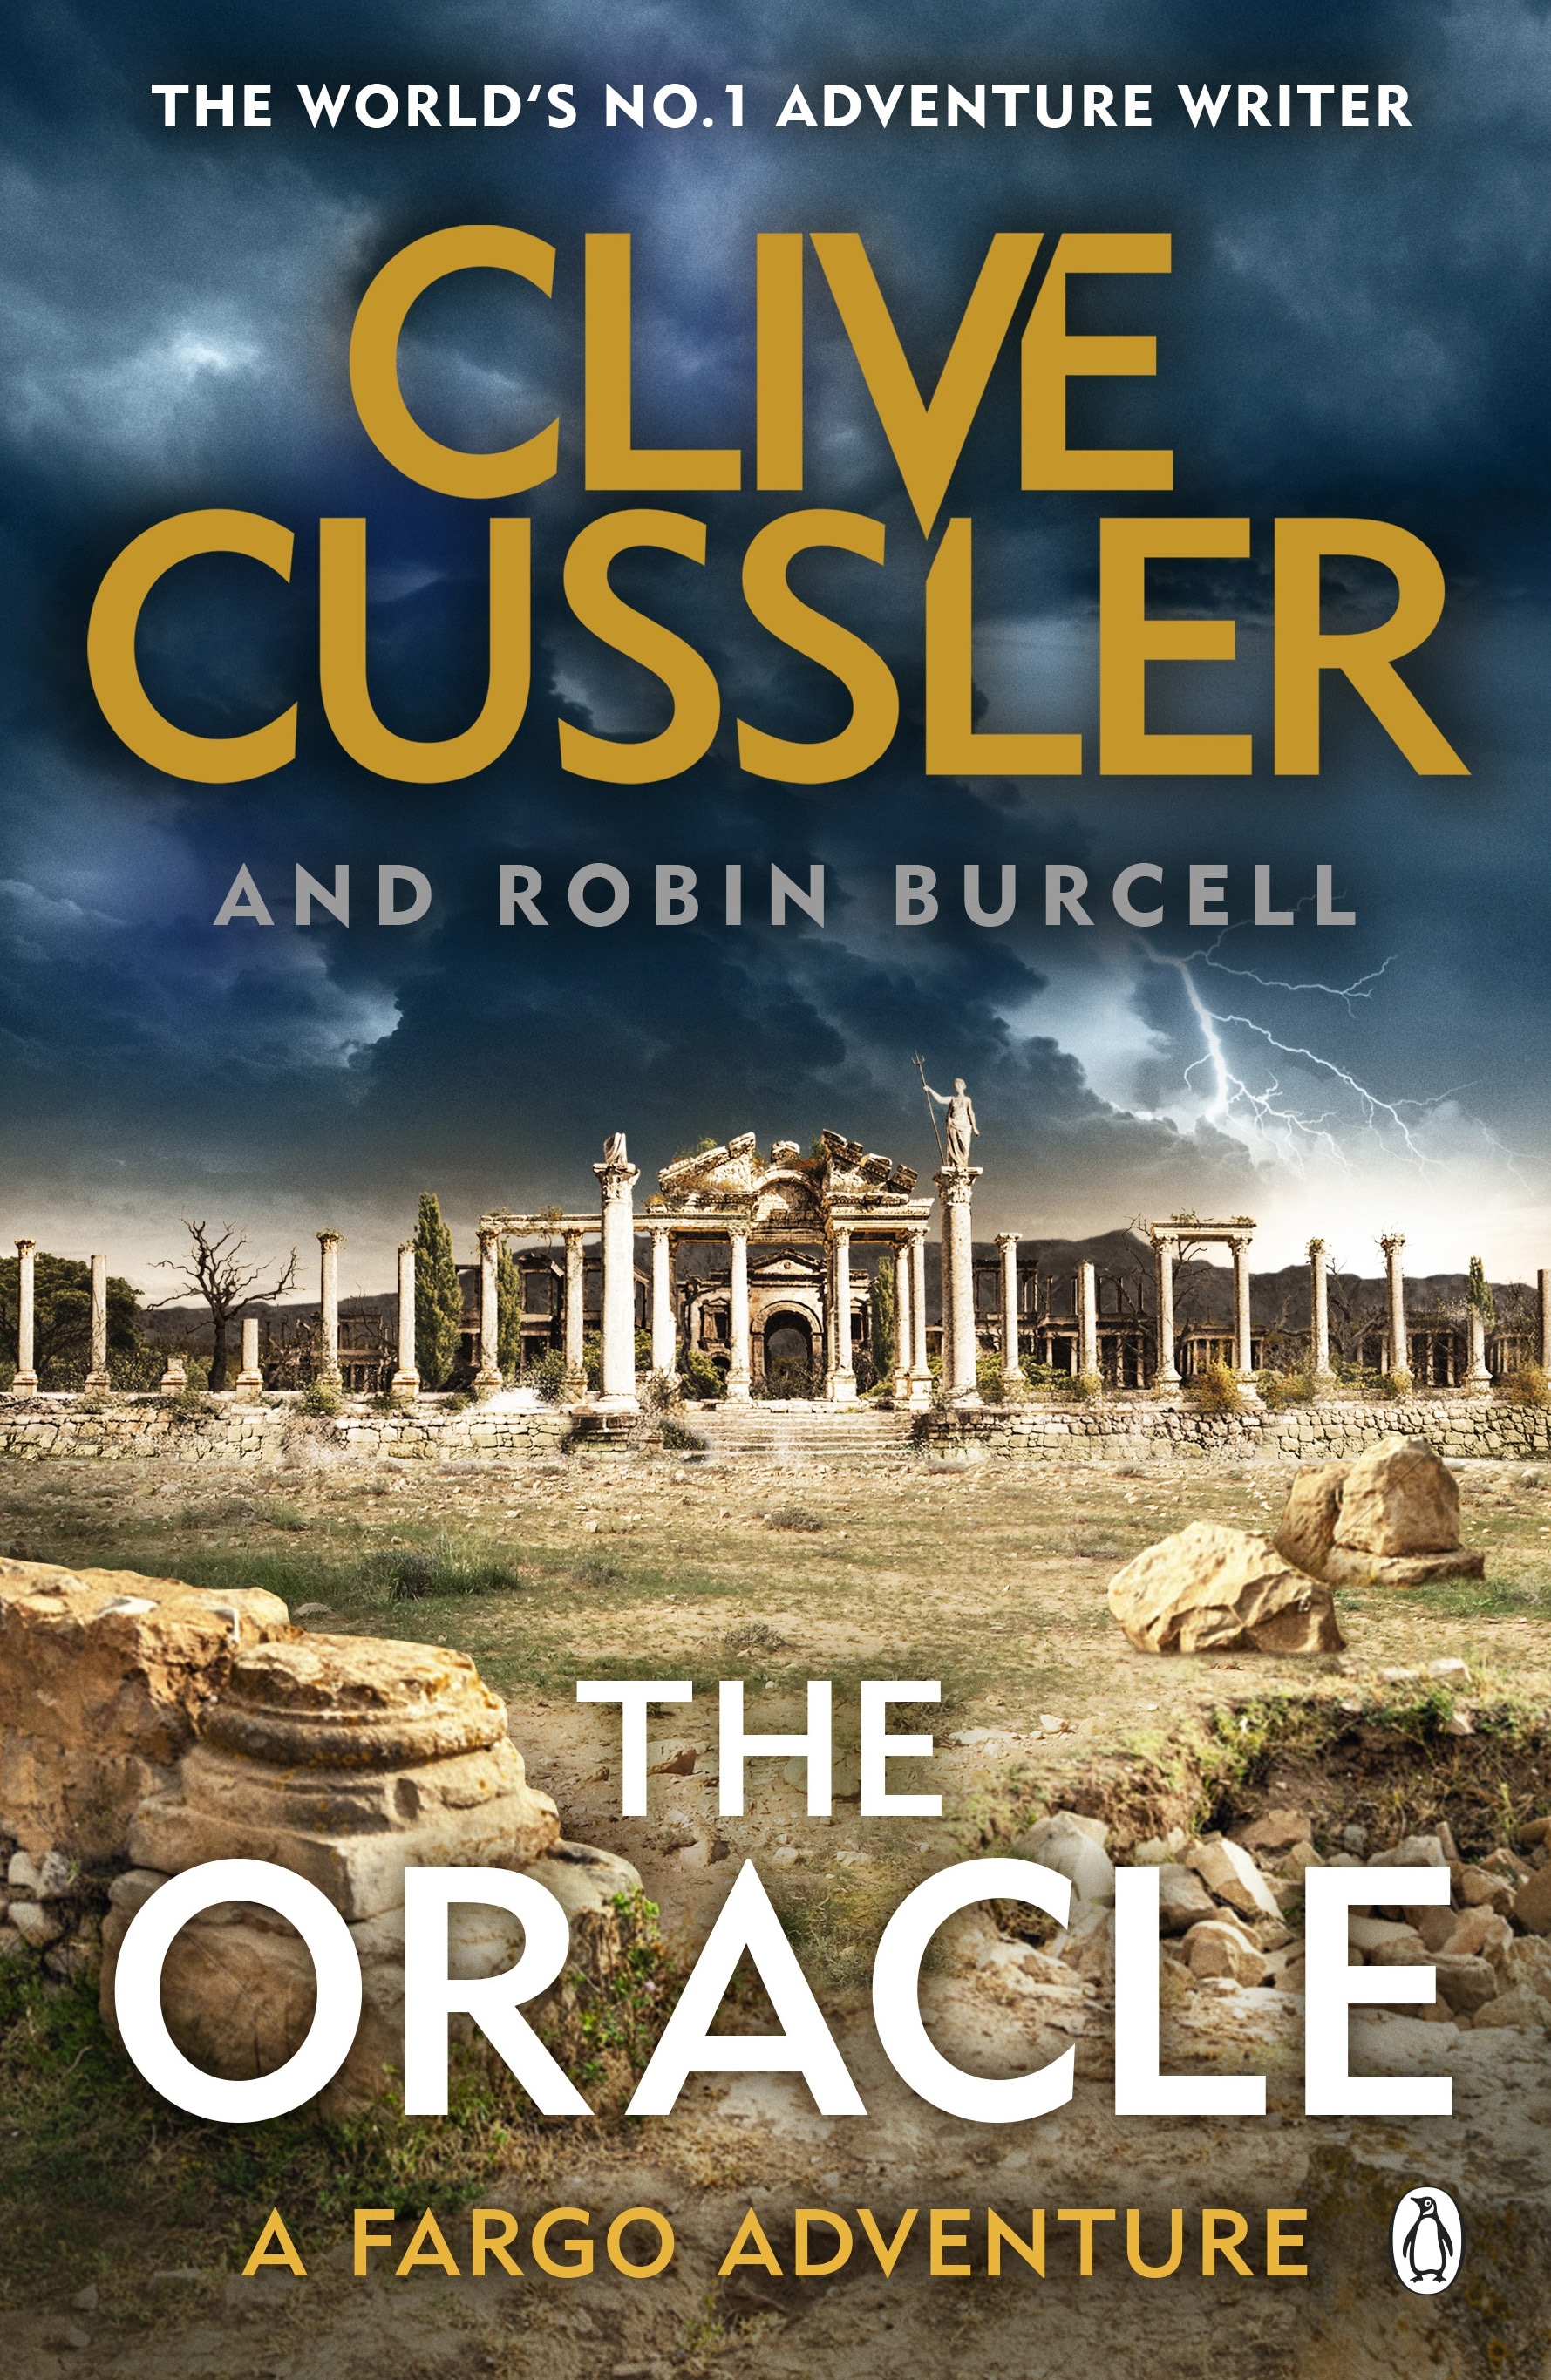 Book “The Oracle” by Clive Cussler, Robin Burcell — May 14, 2020